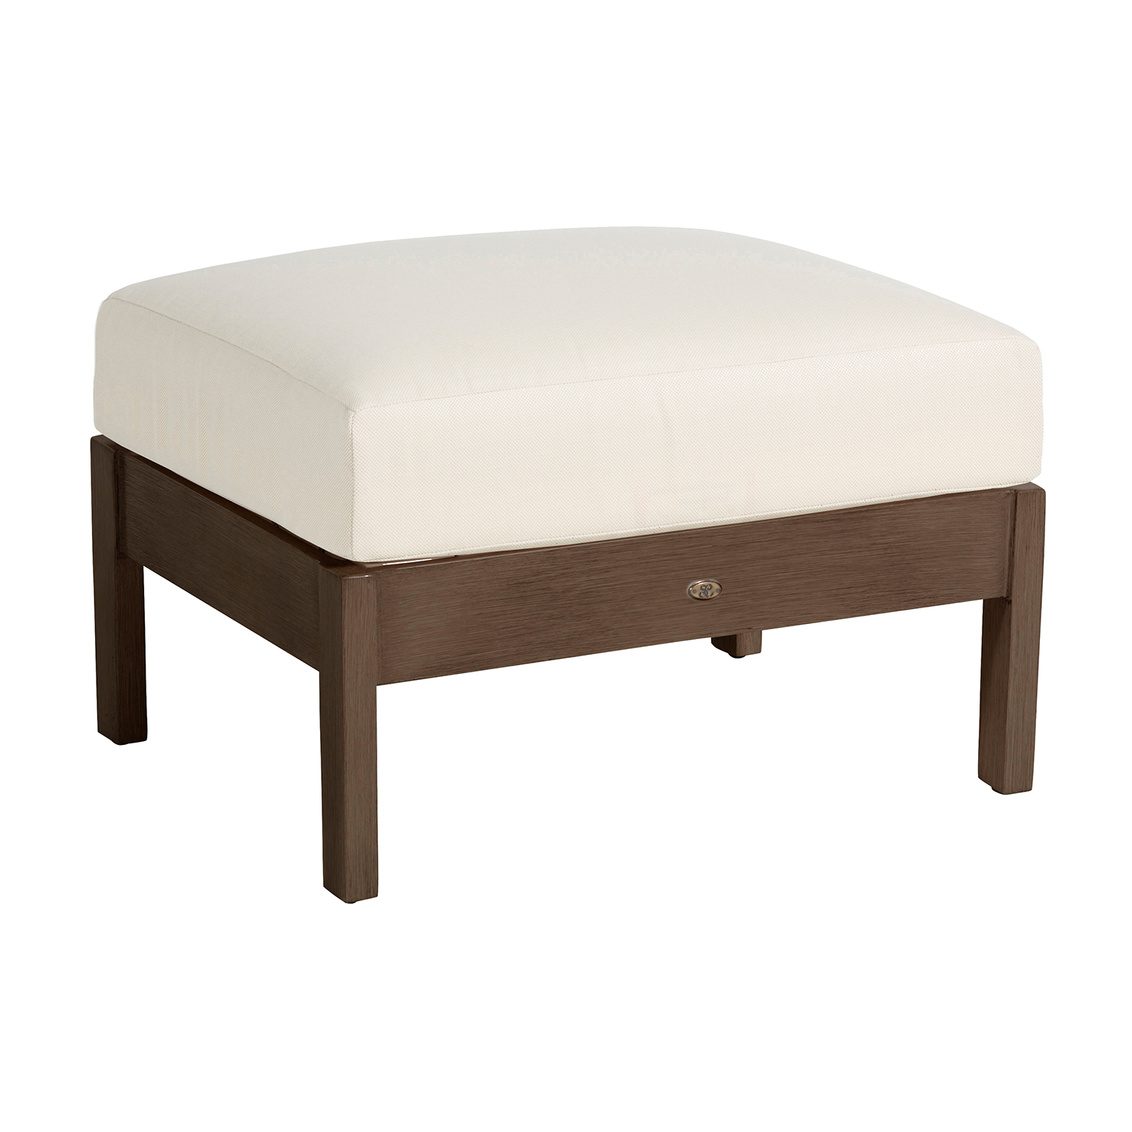 kennebunkport ottoman in oak – frame only product image